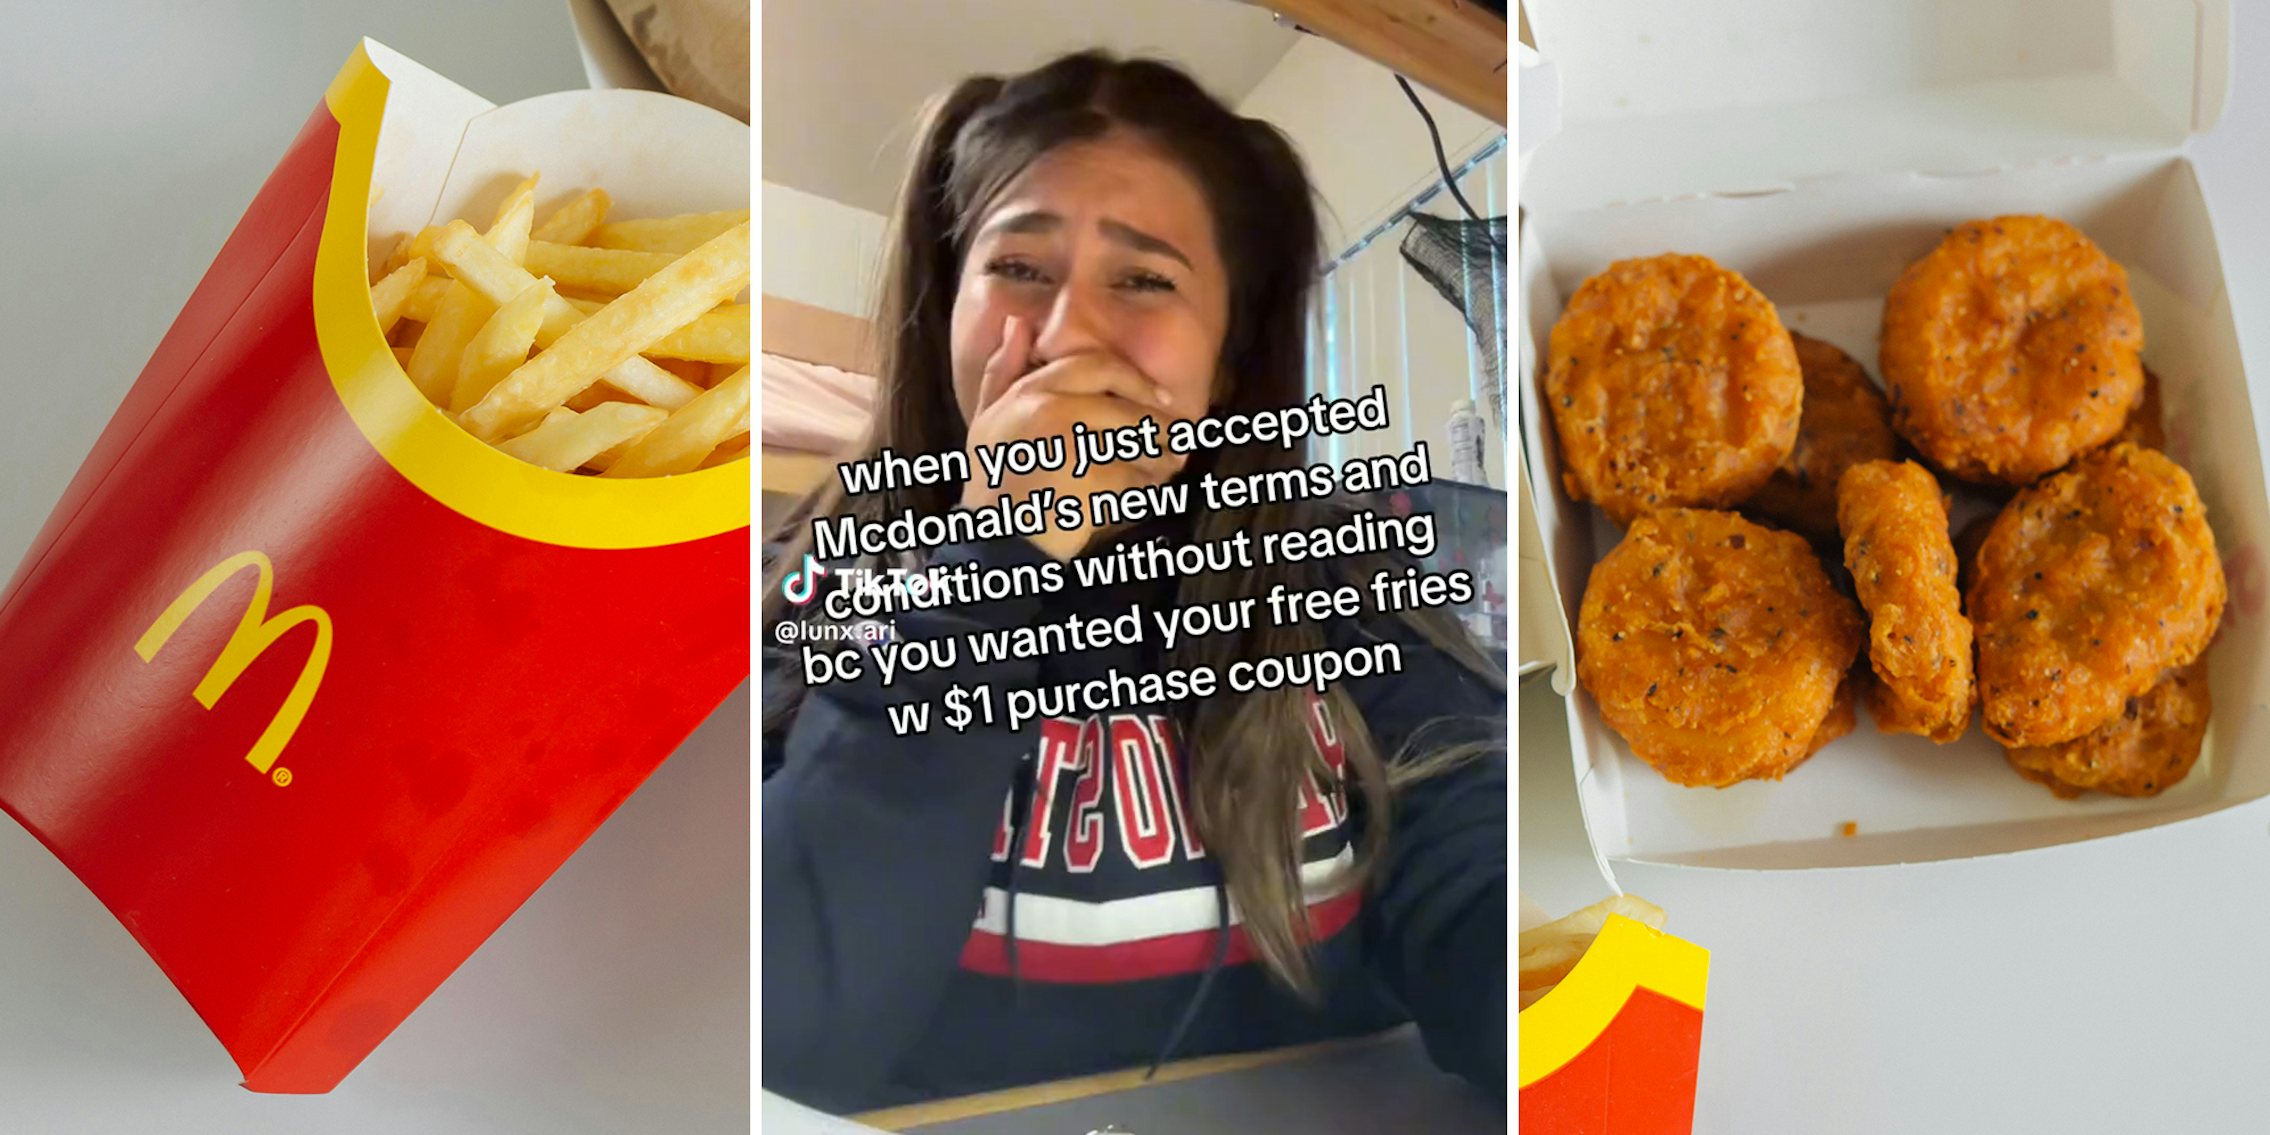 McDonald's fries (l) Young woman crying with caption 'when you just accepted McDonald's new terms and conditions without reading bc you wanted your free fries w $1 purchase coupon' (c) McDonald's chicken nuggets (r)